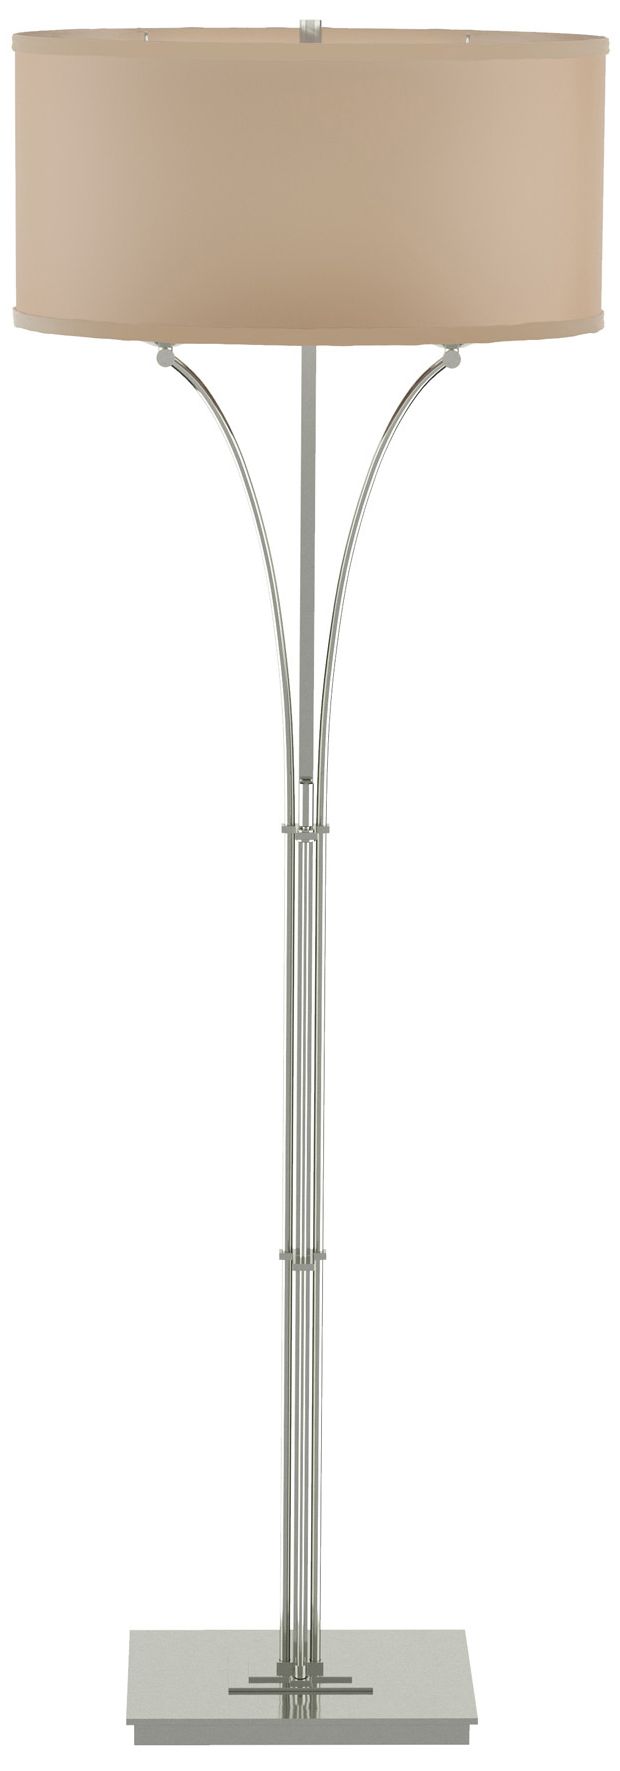 Contemporary Formae Floor Lamp - Sterling Finish - Doeskin Suede Shade